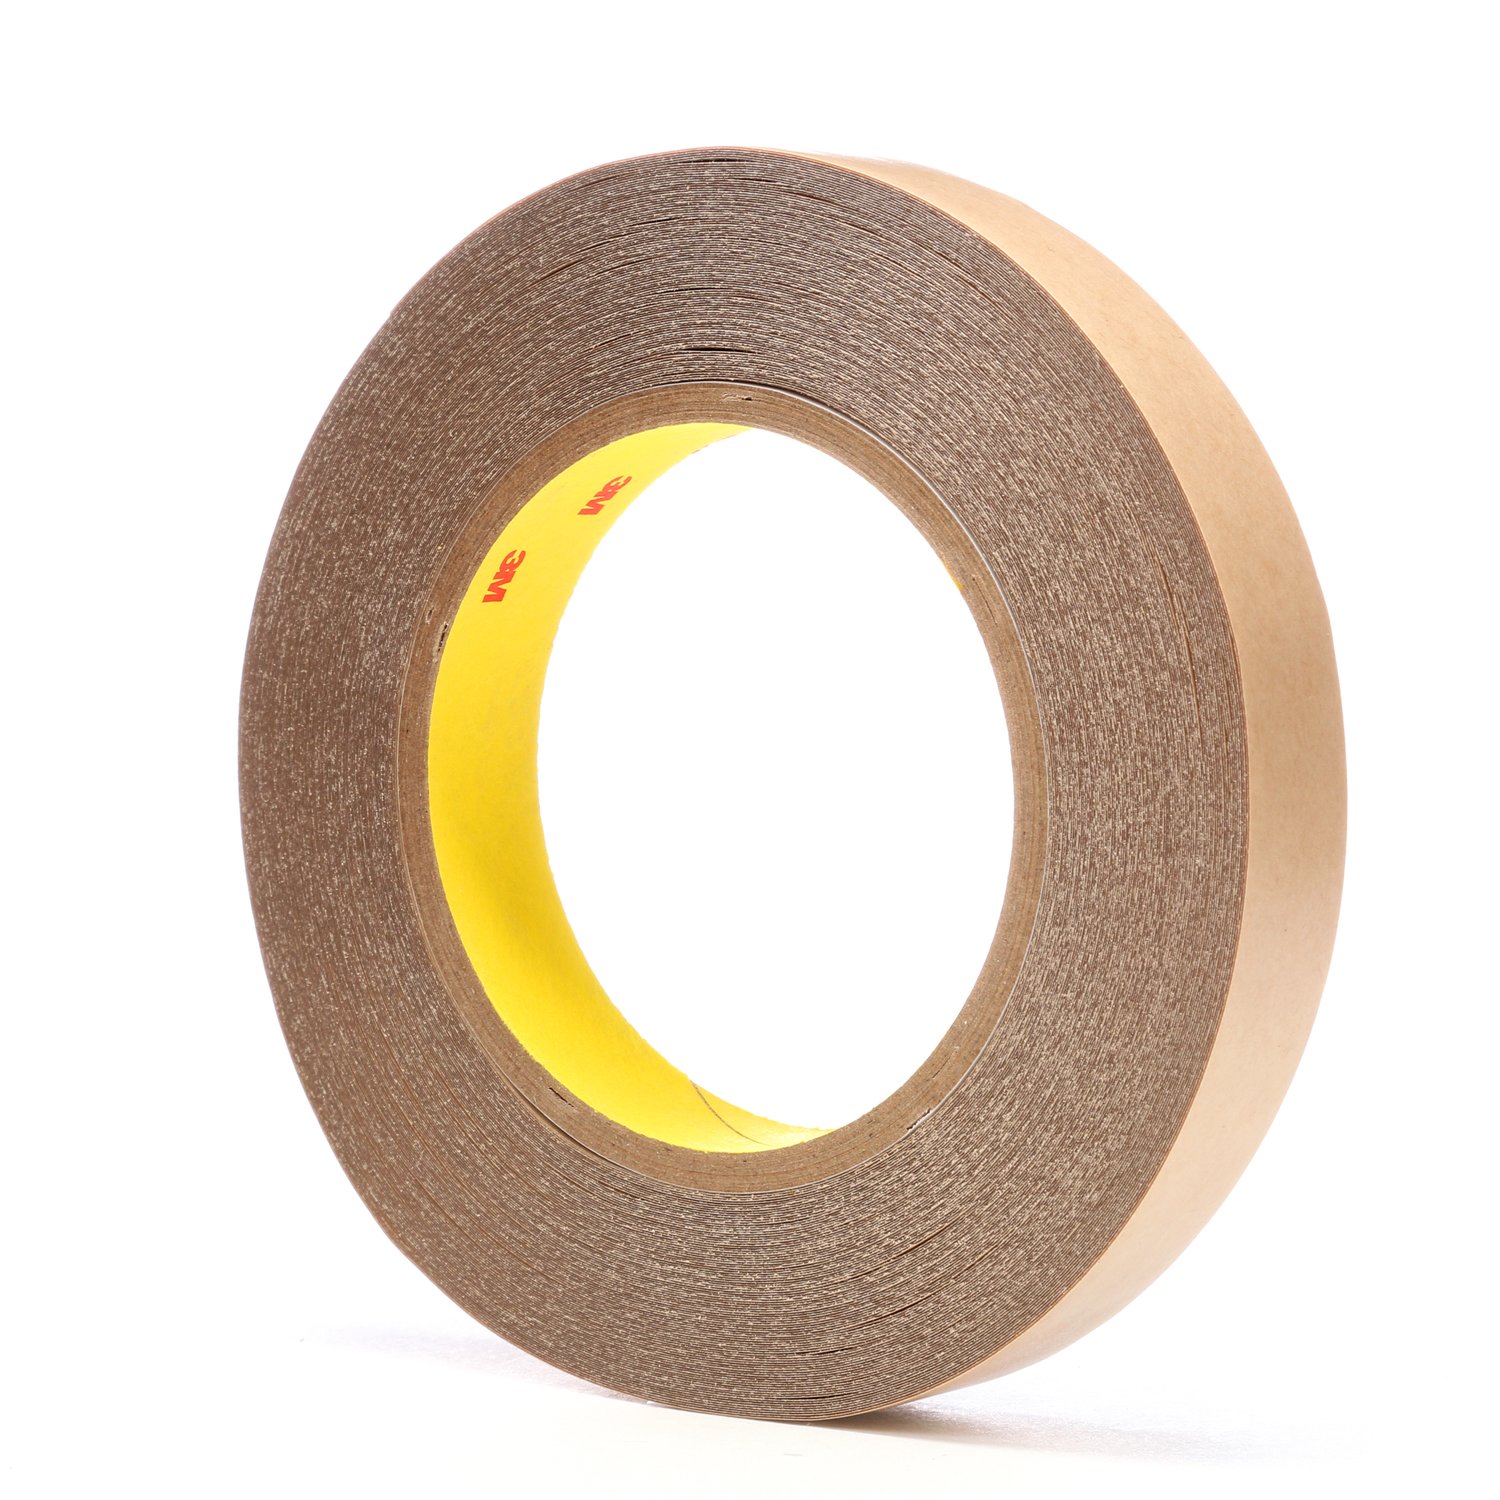 7000123415 - 3M Double Coated Tape 9500PC, Clear, 3/4 in x 36 yd, 5.6 mil, 48 rolls
per case